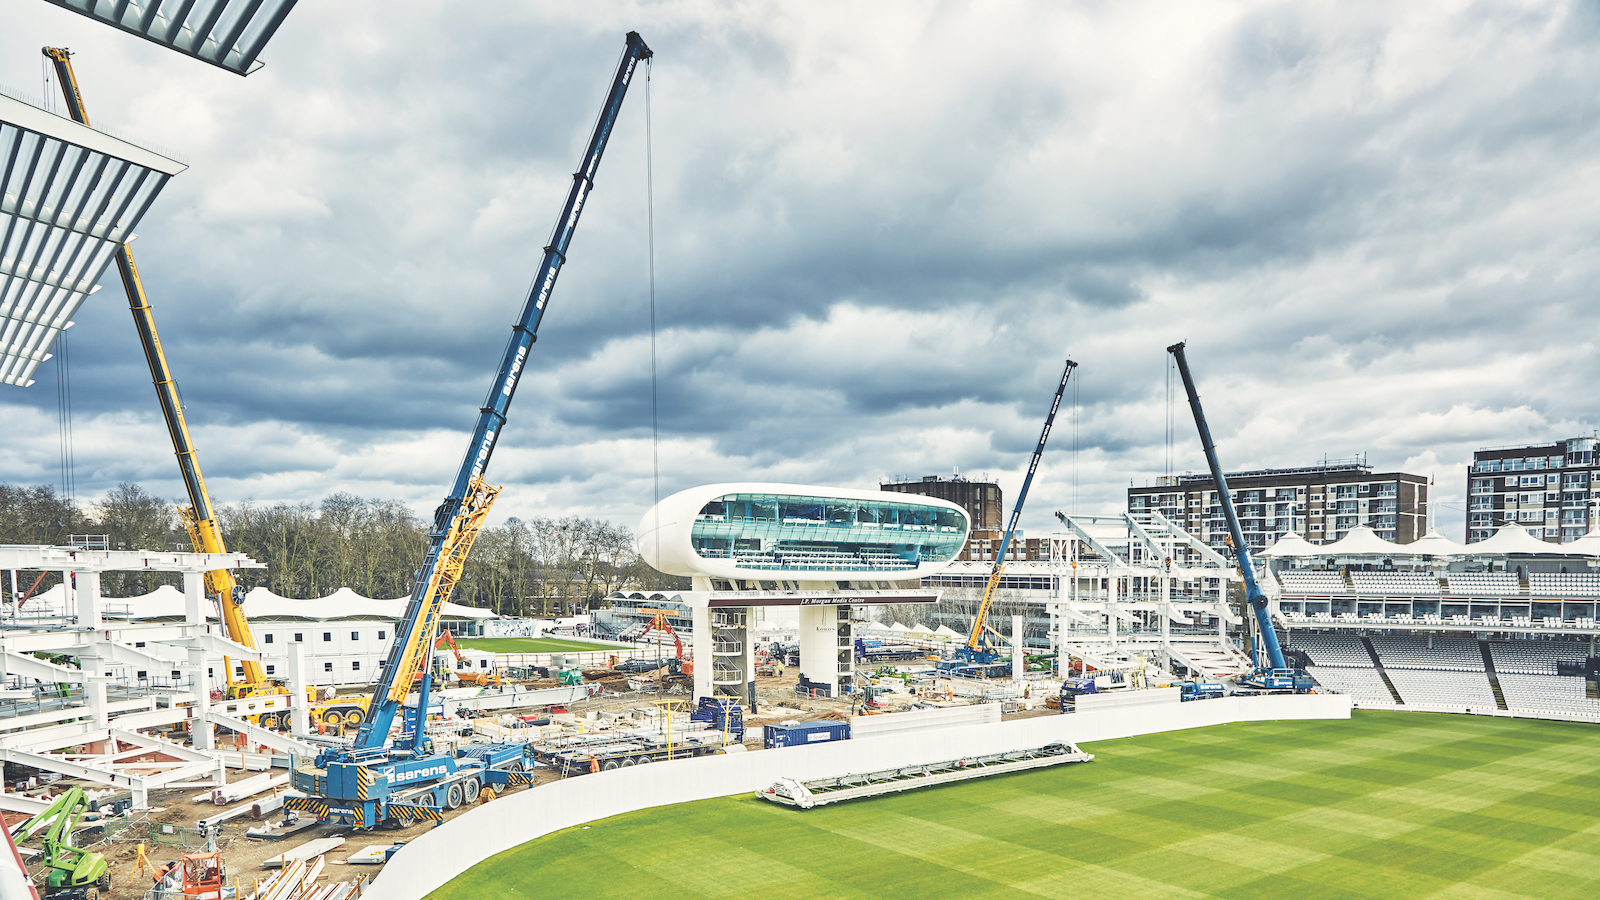 Part of Marylebone Cricket Club’s ongoing masterplan to redevelop the historic Lord’s Cricket Ground, two steel-framed stands are currently under construction. The new Compton and Edrich stands are both three-tier structures which will accommodate 11,600 spectators. Severfield is providing 2,300 tonnes of steel, working with main contractor ISG. Photo supplied by New Steel Construction